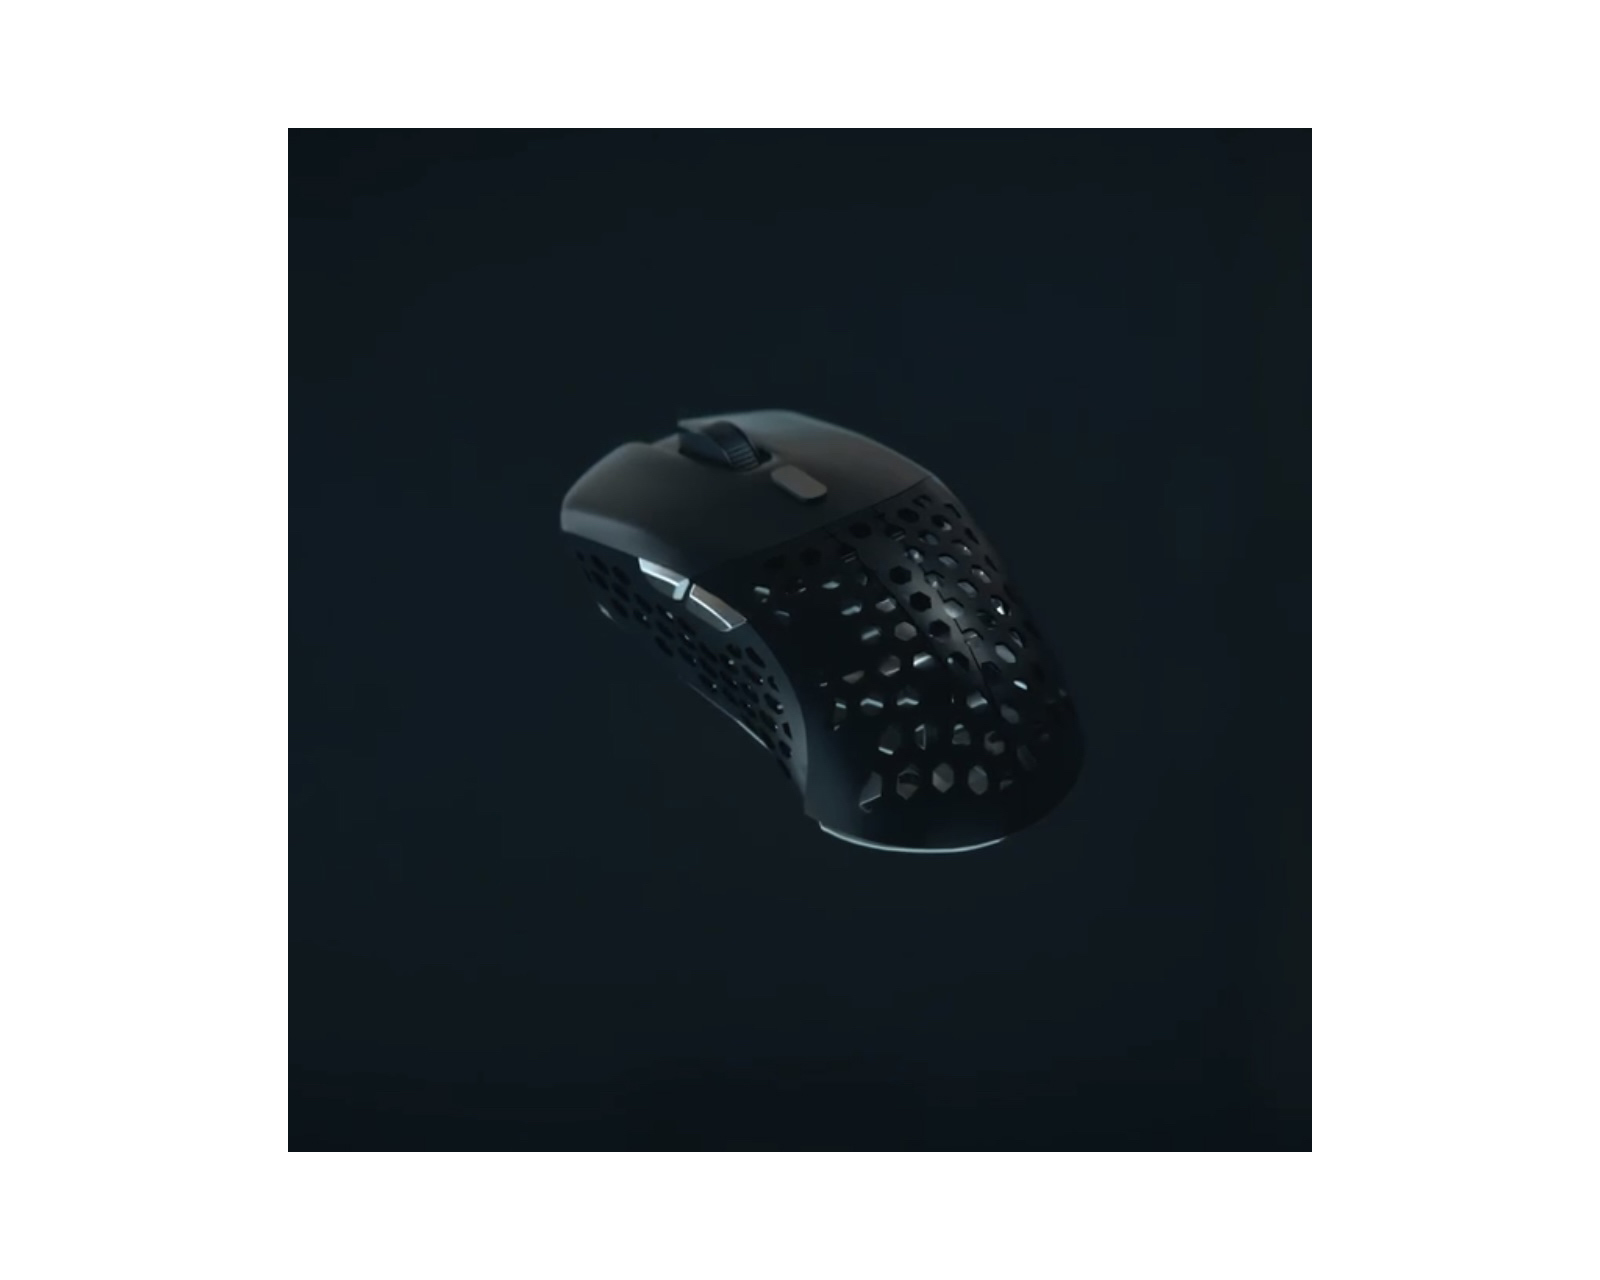 InfinityMice Infinity Hump Pro - Claw Shape Hump for FinalMouse 